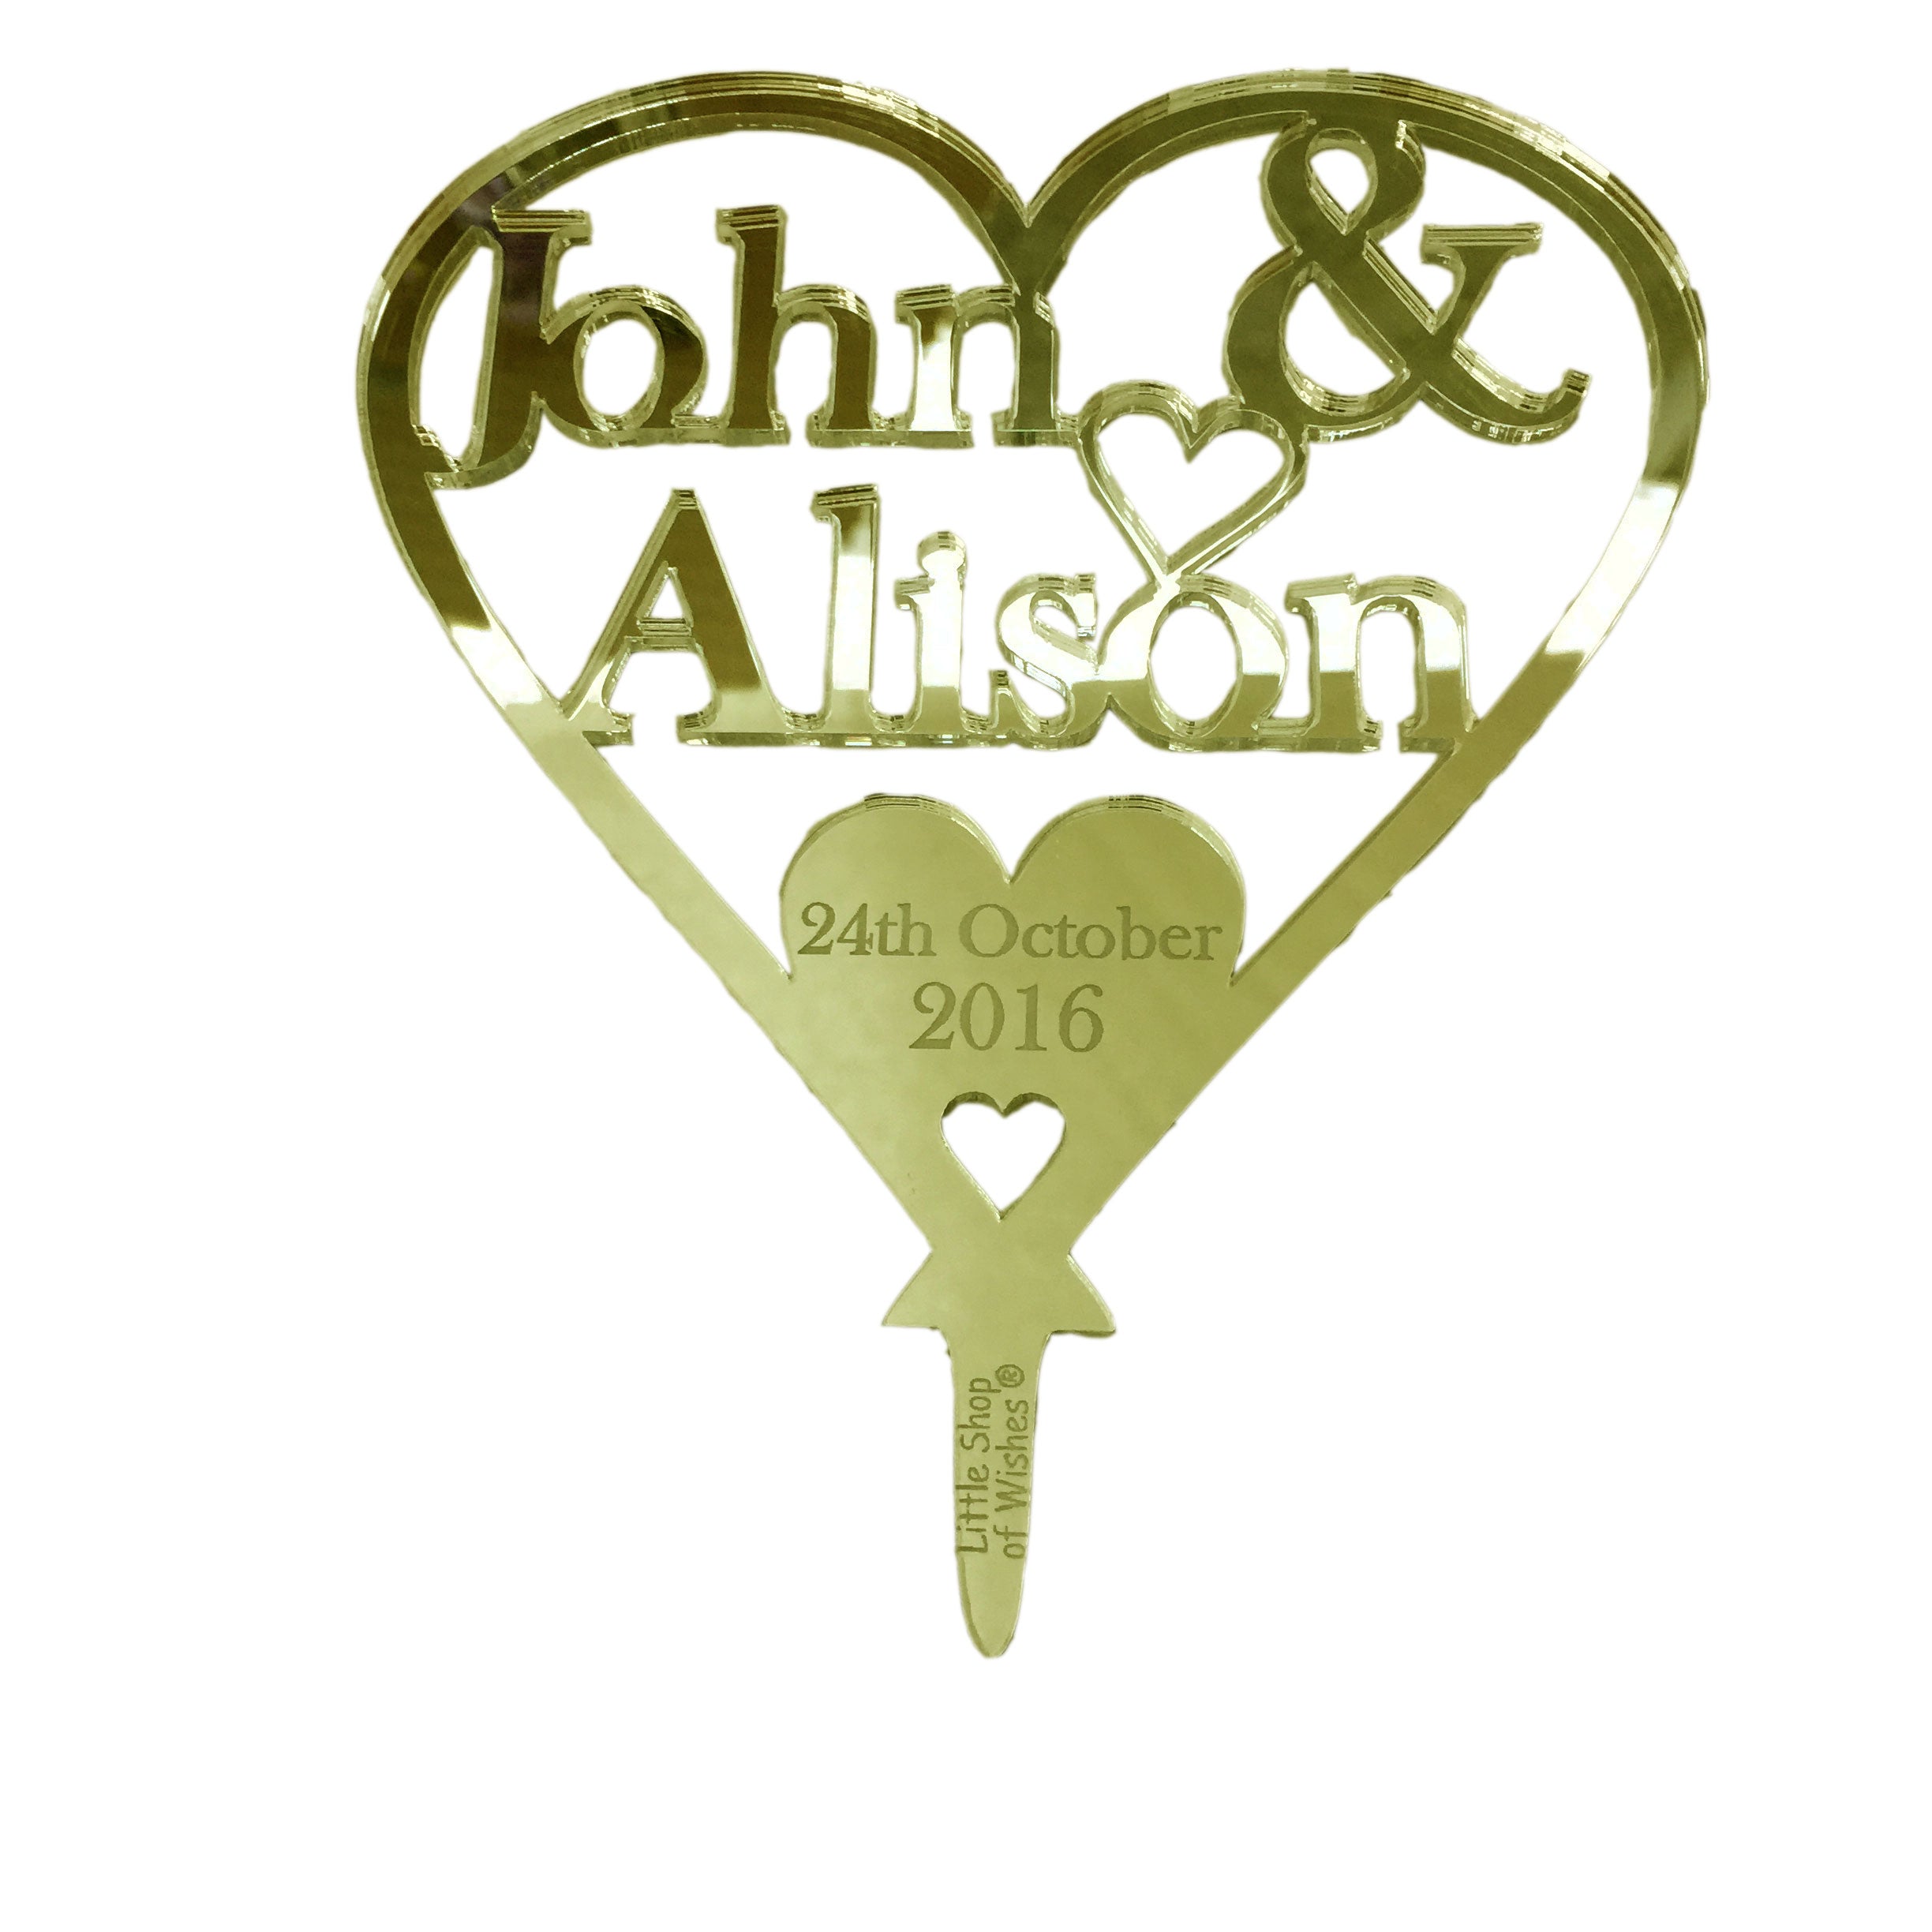 Two Names Heart Cake Topper Personalised Wedding / Anniversary Decoration - Gold Mirror Acrylic